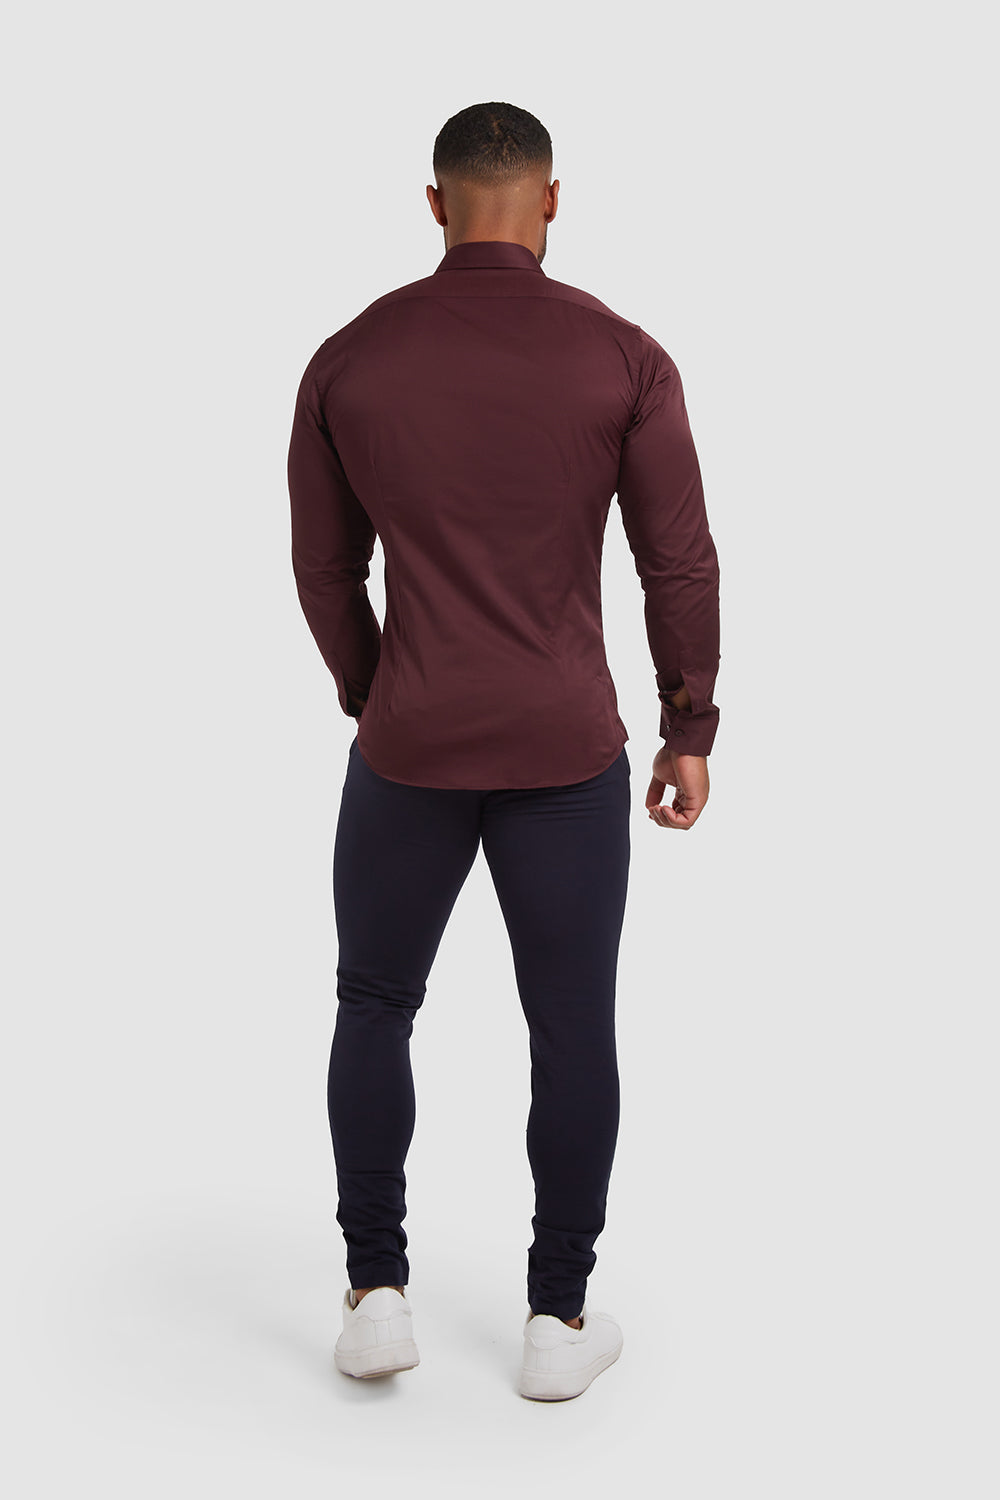 in Signature - Fit 2.0 - USA Muscle ATHLETE TAILORED Burgundy Shirt